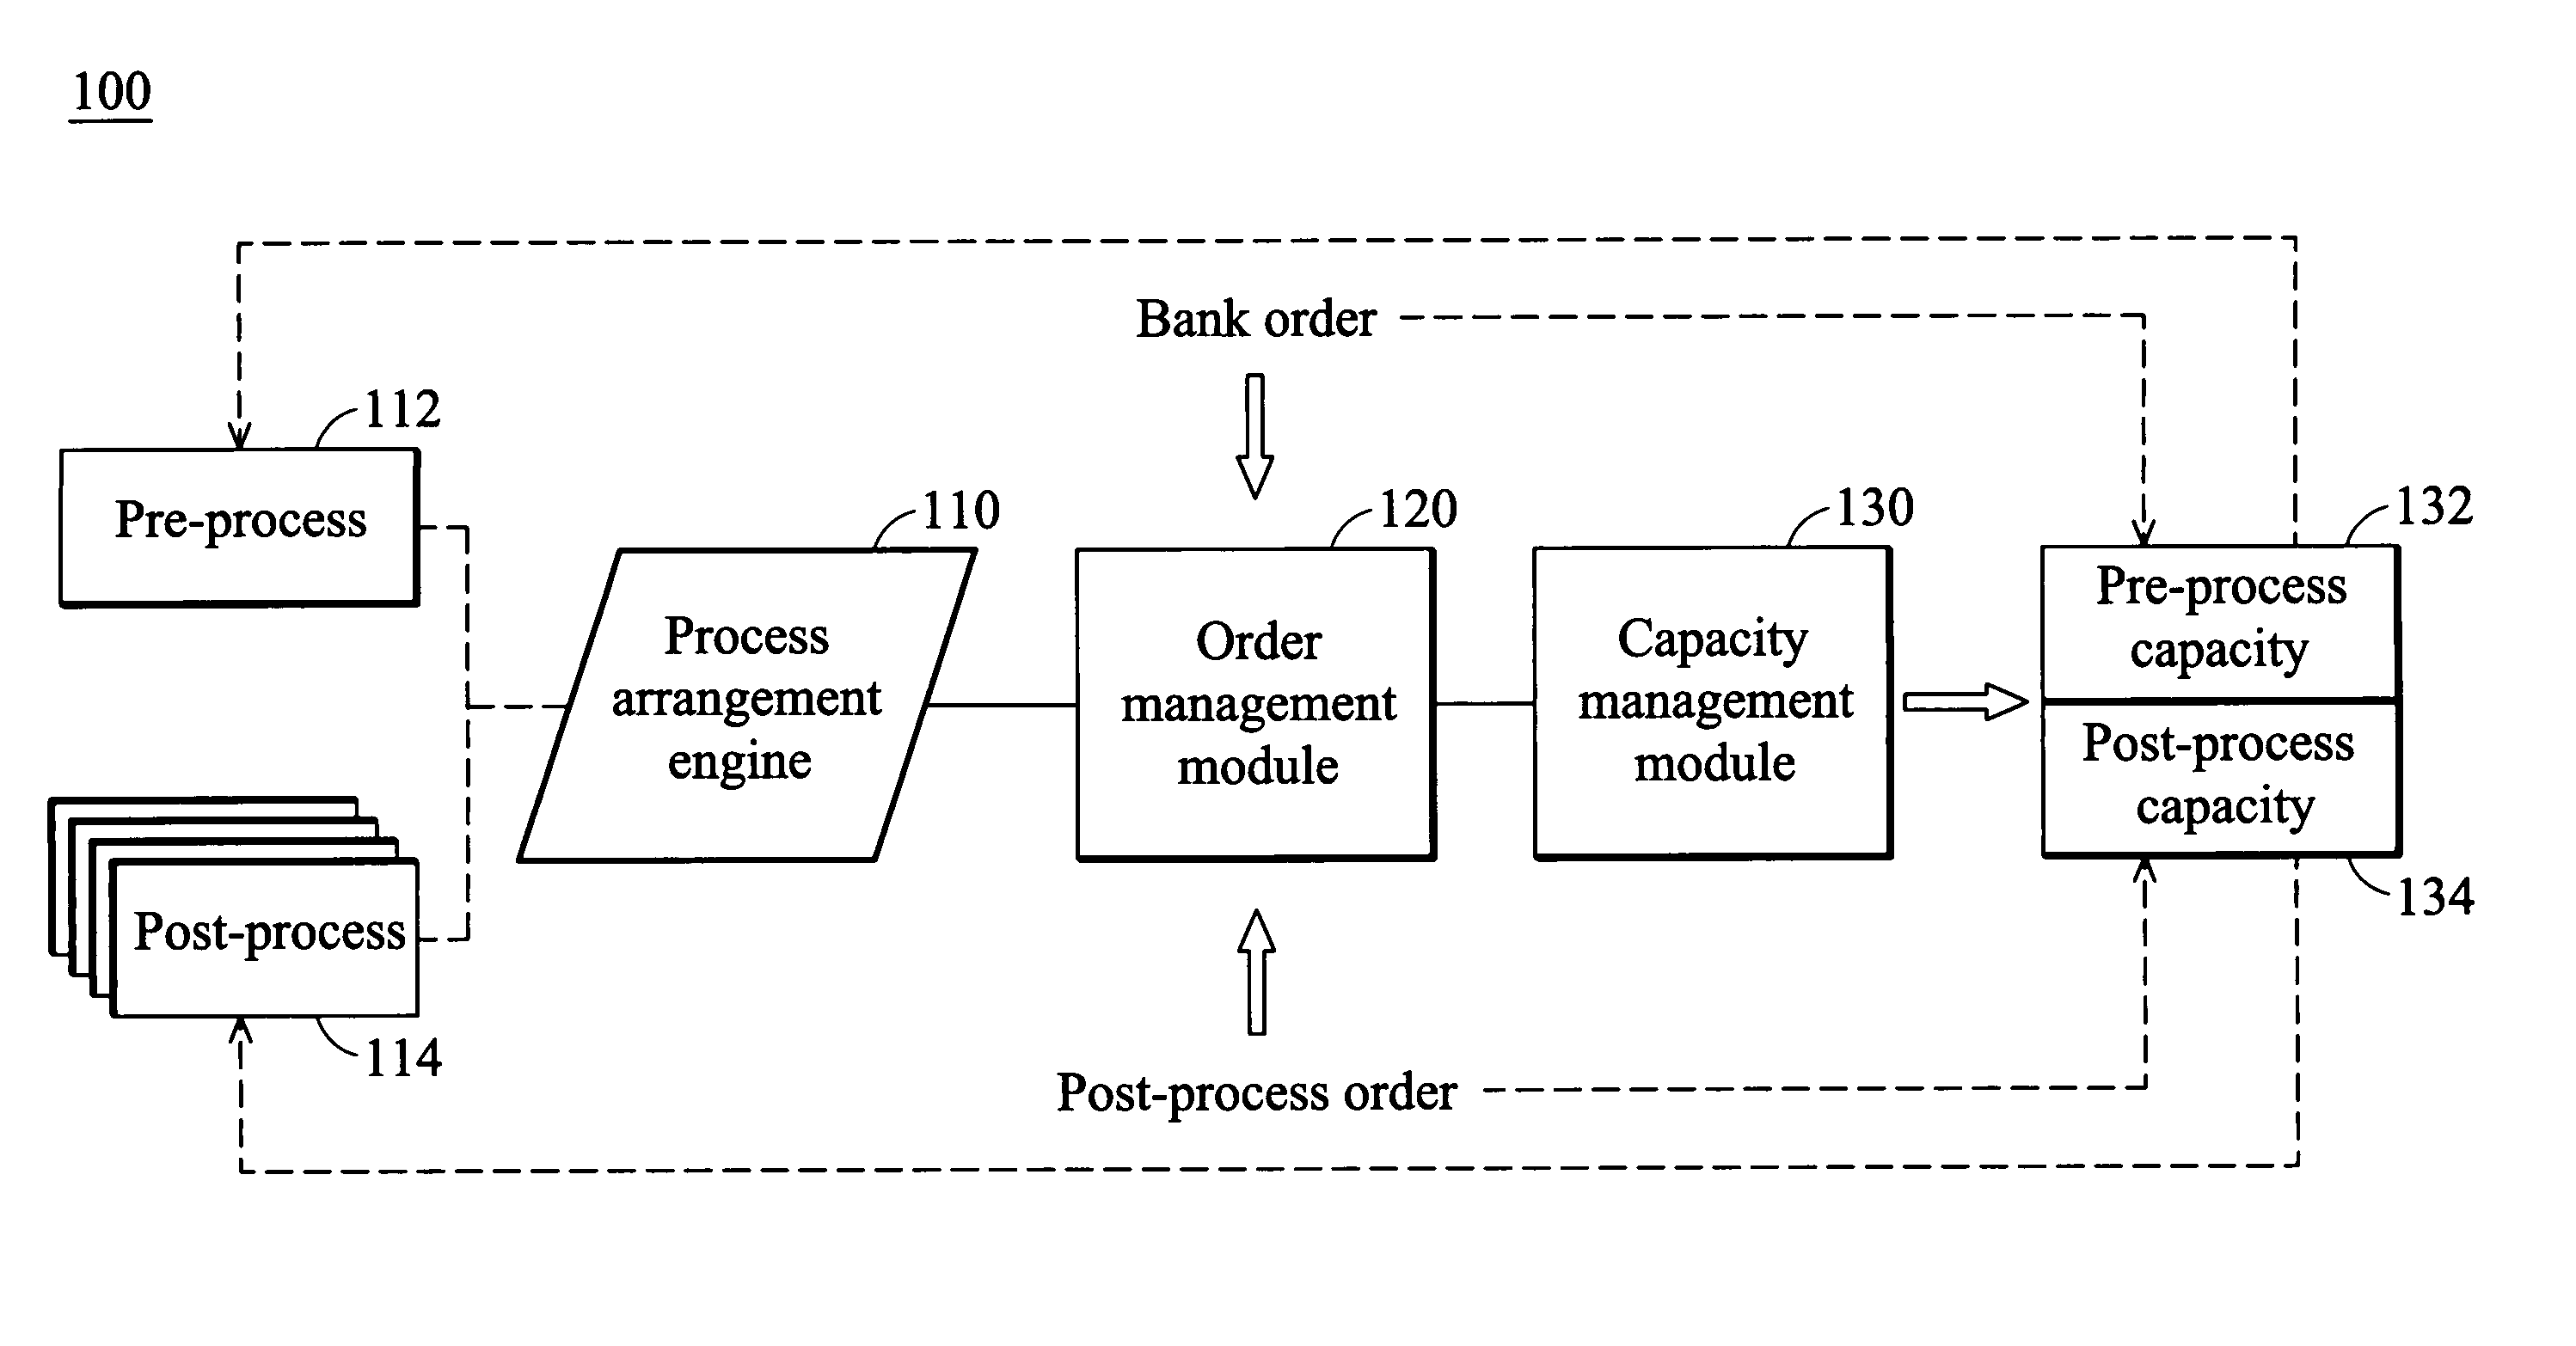 System and method of reserving capacity for a pre-process order